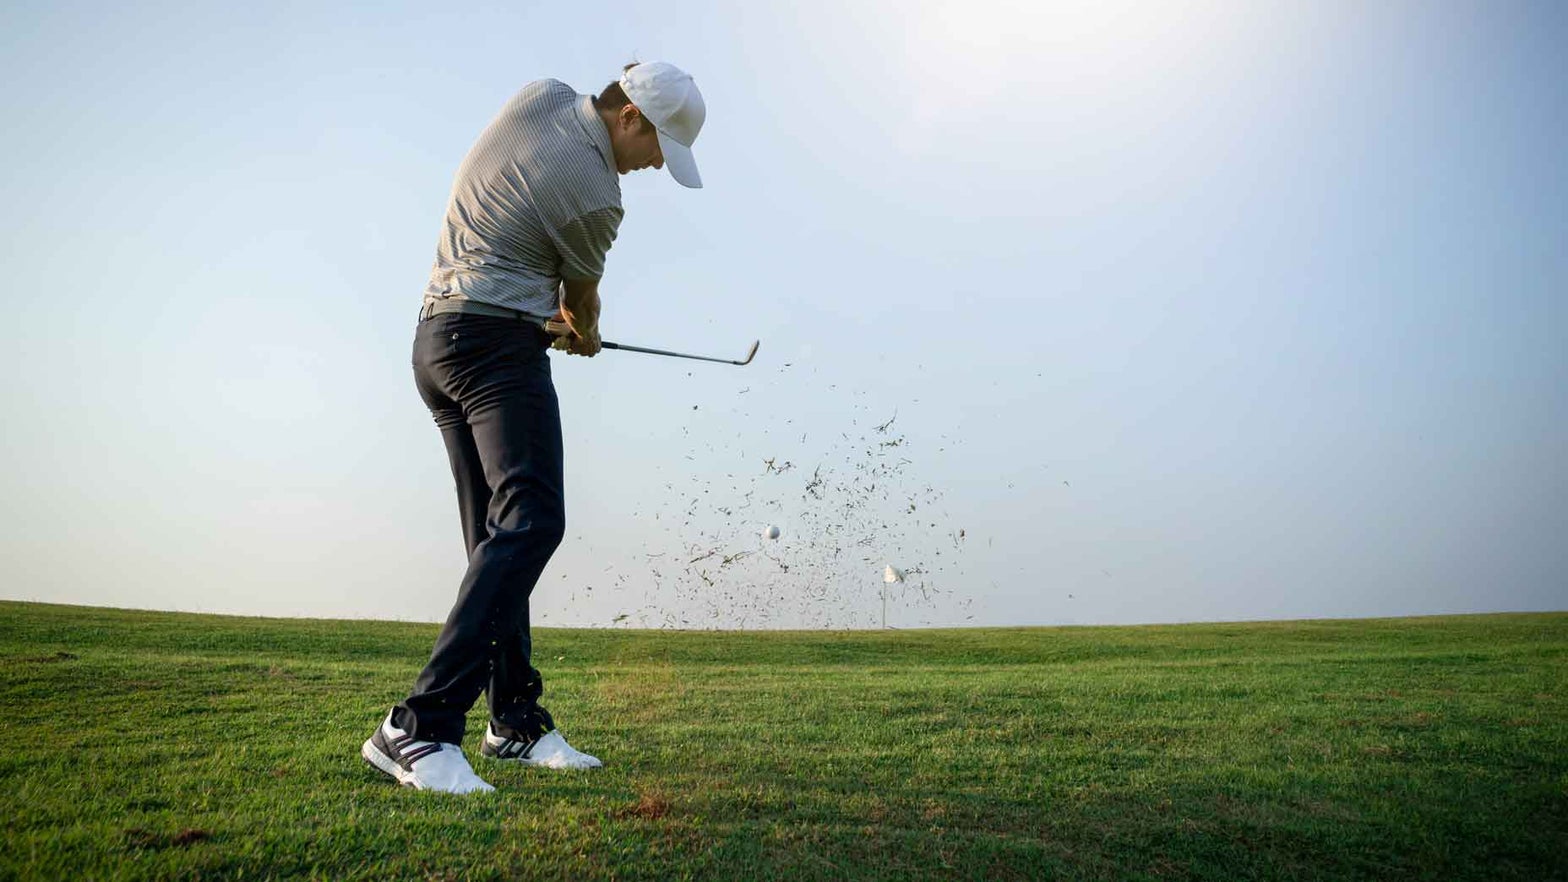 Struggling with a slice? Try this easy drill to fix it